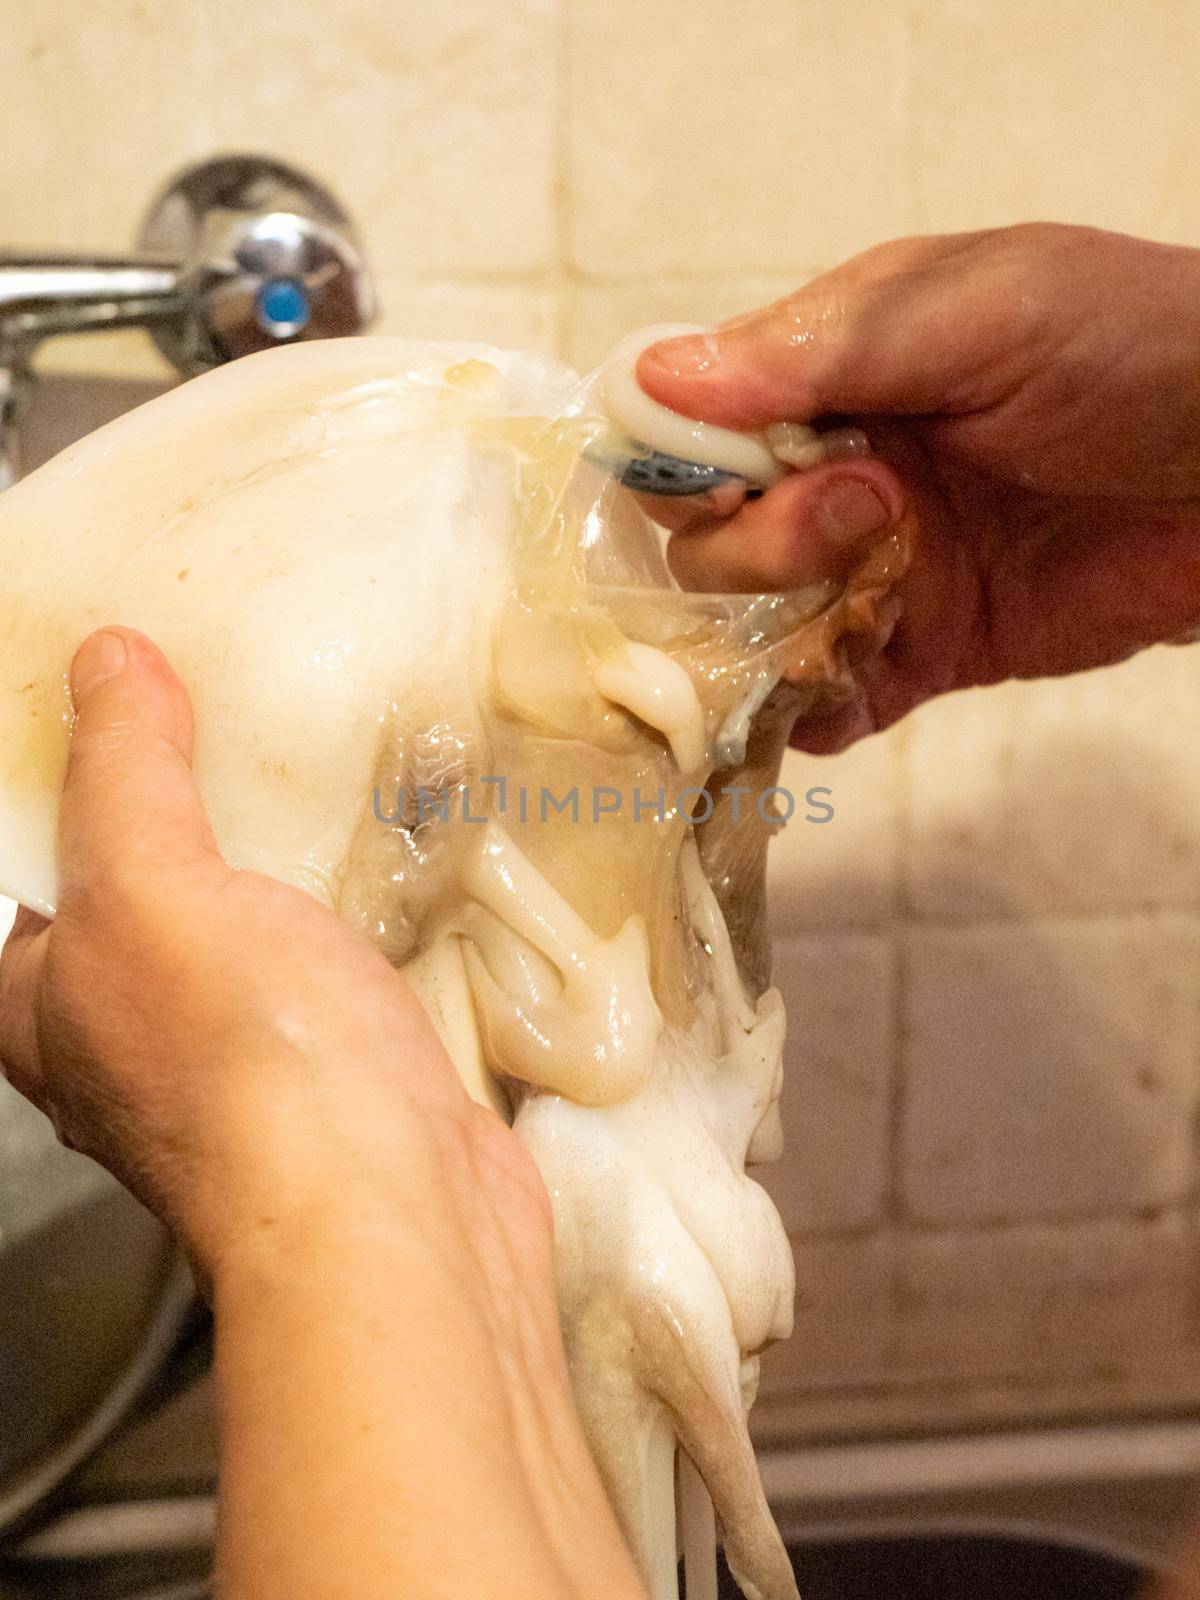 cleaning a raw adriatic cuttlefish at home in Numana, Marche, Italy